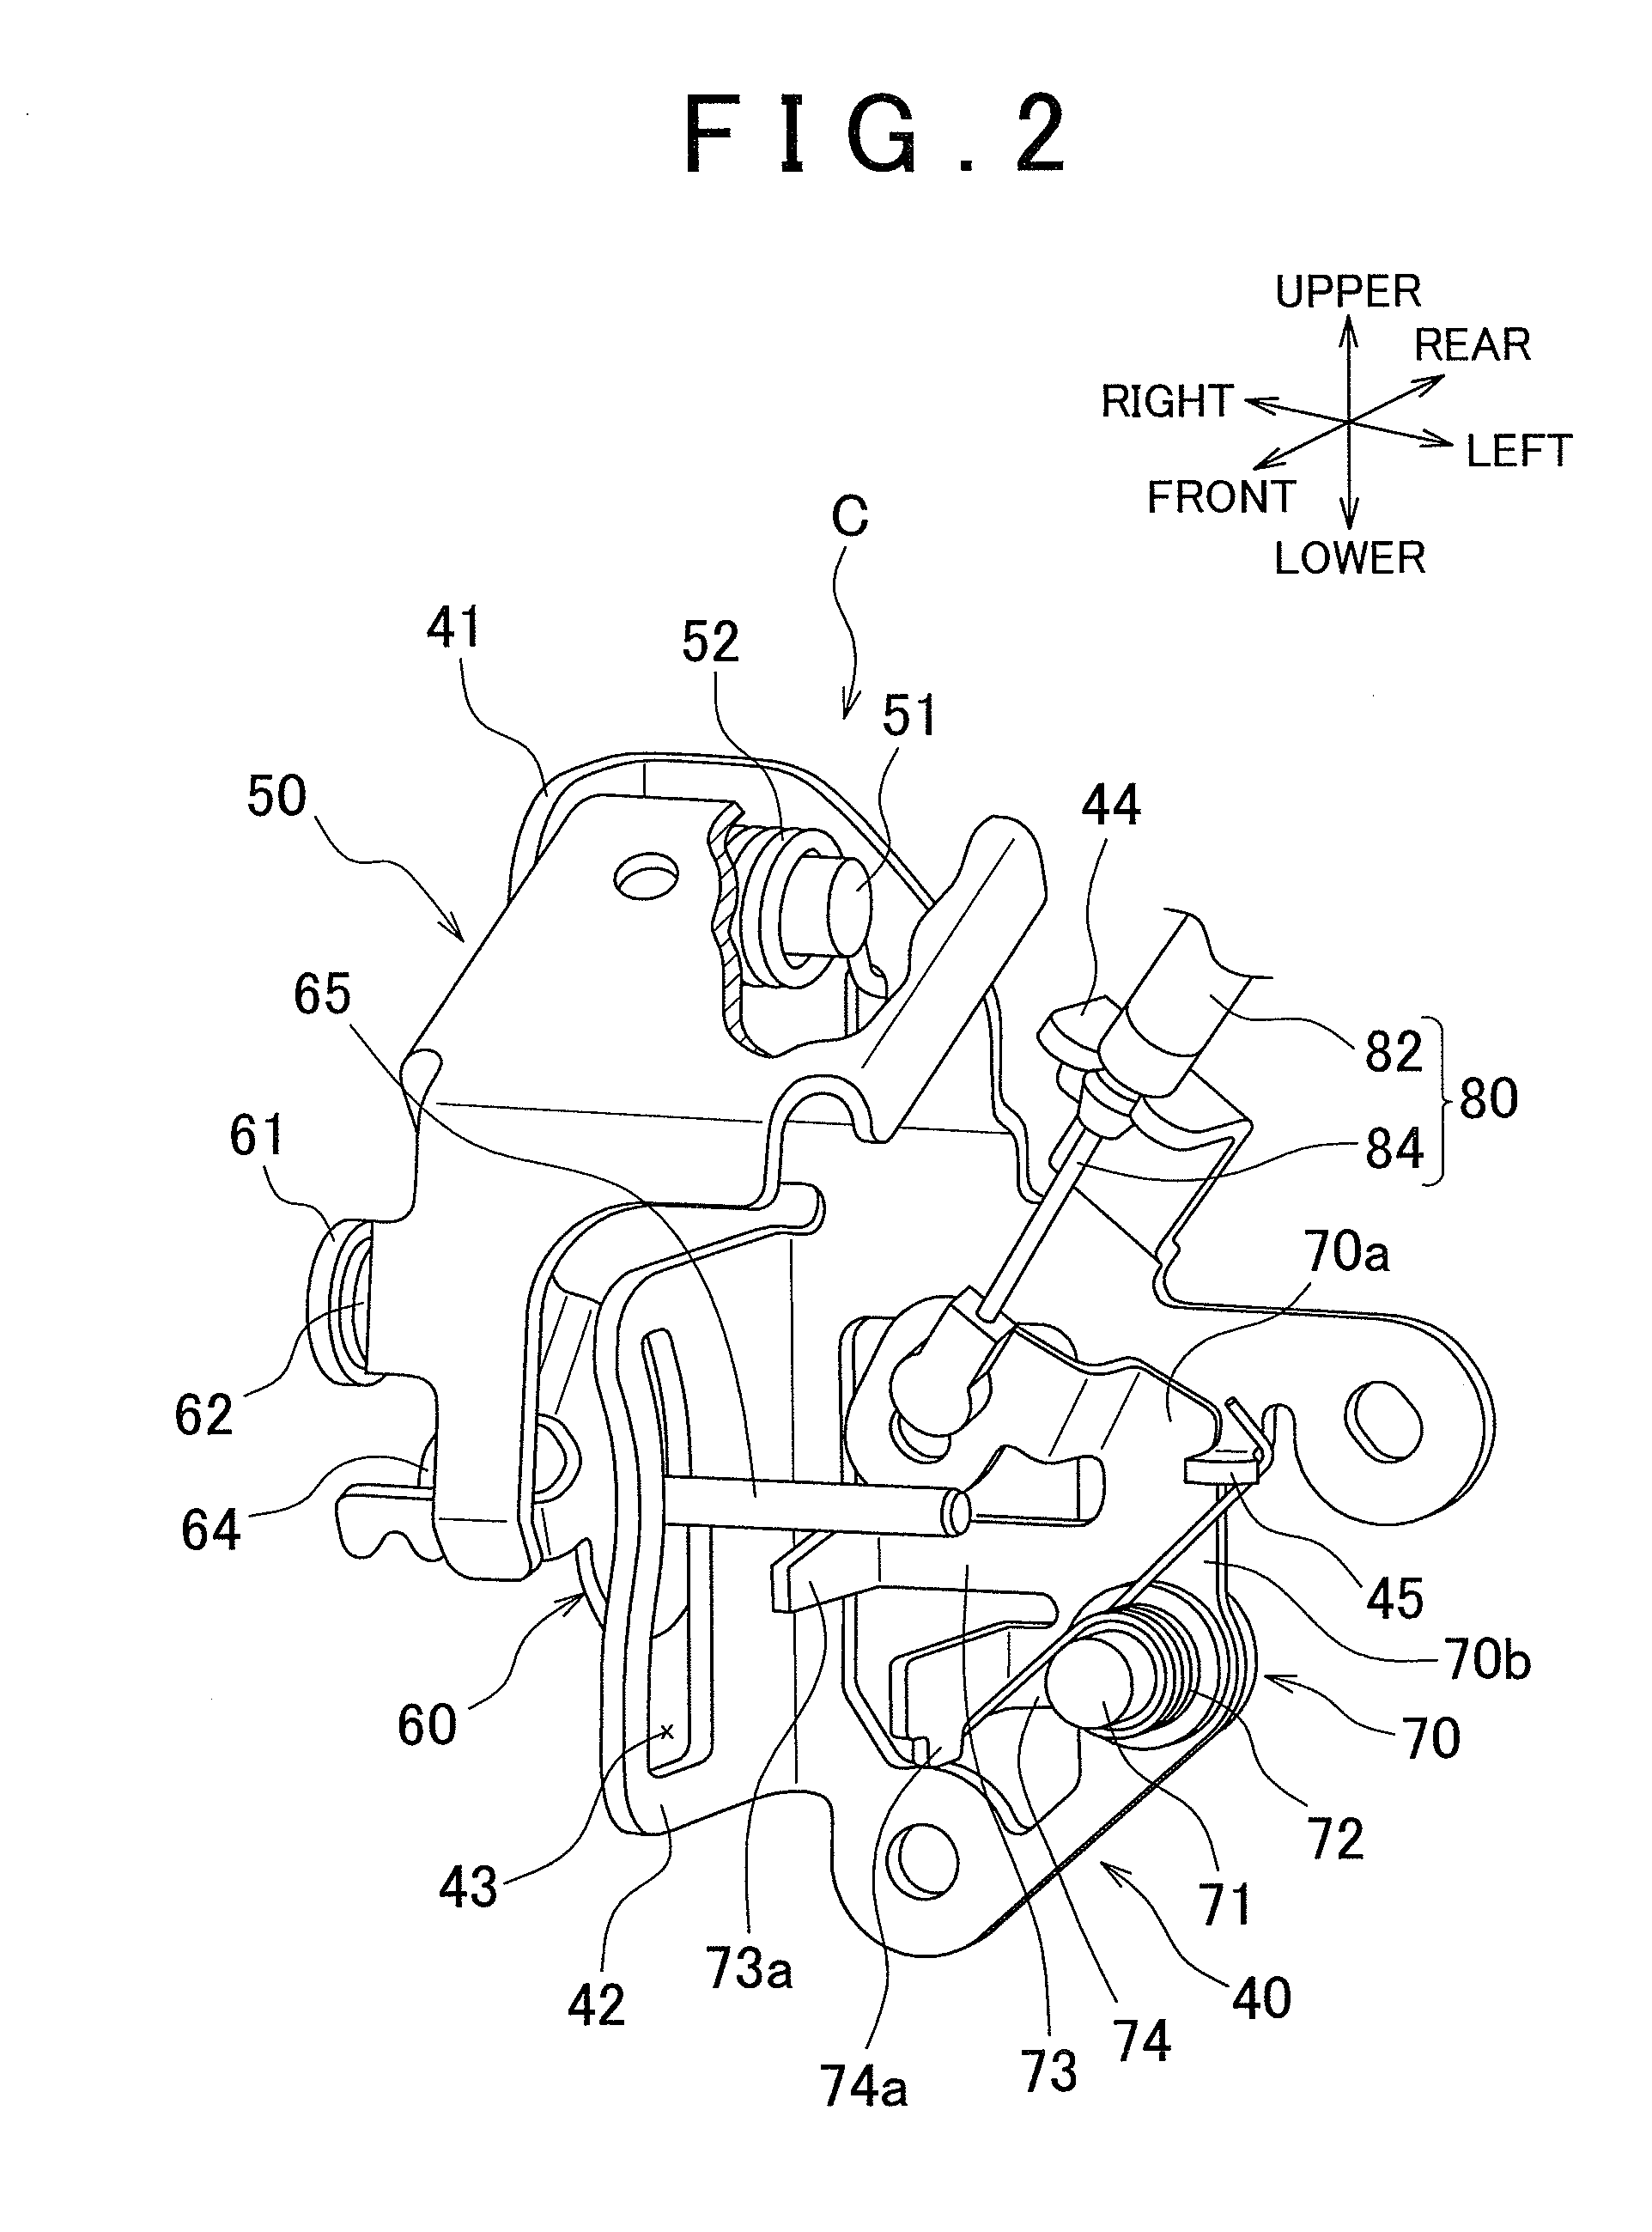 Clutch mechanism for vehicle seat